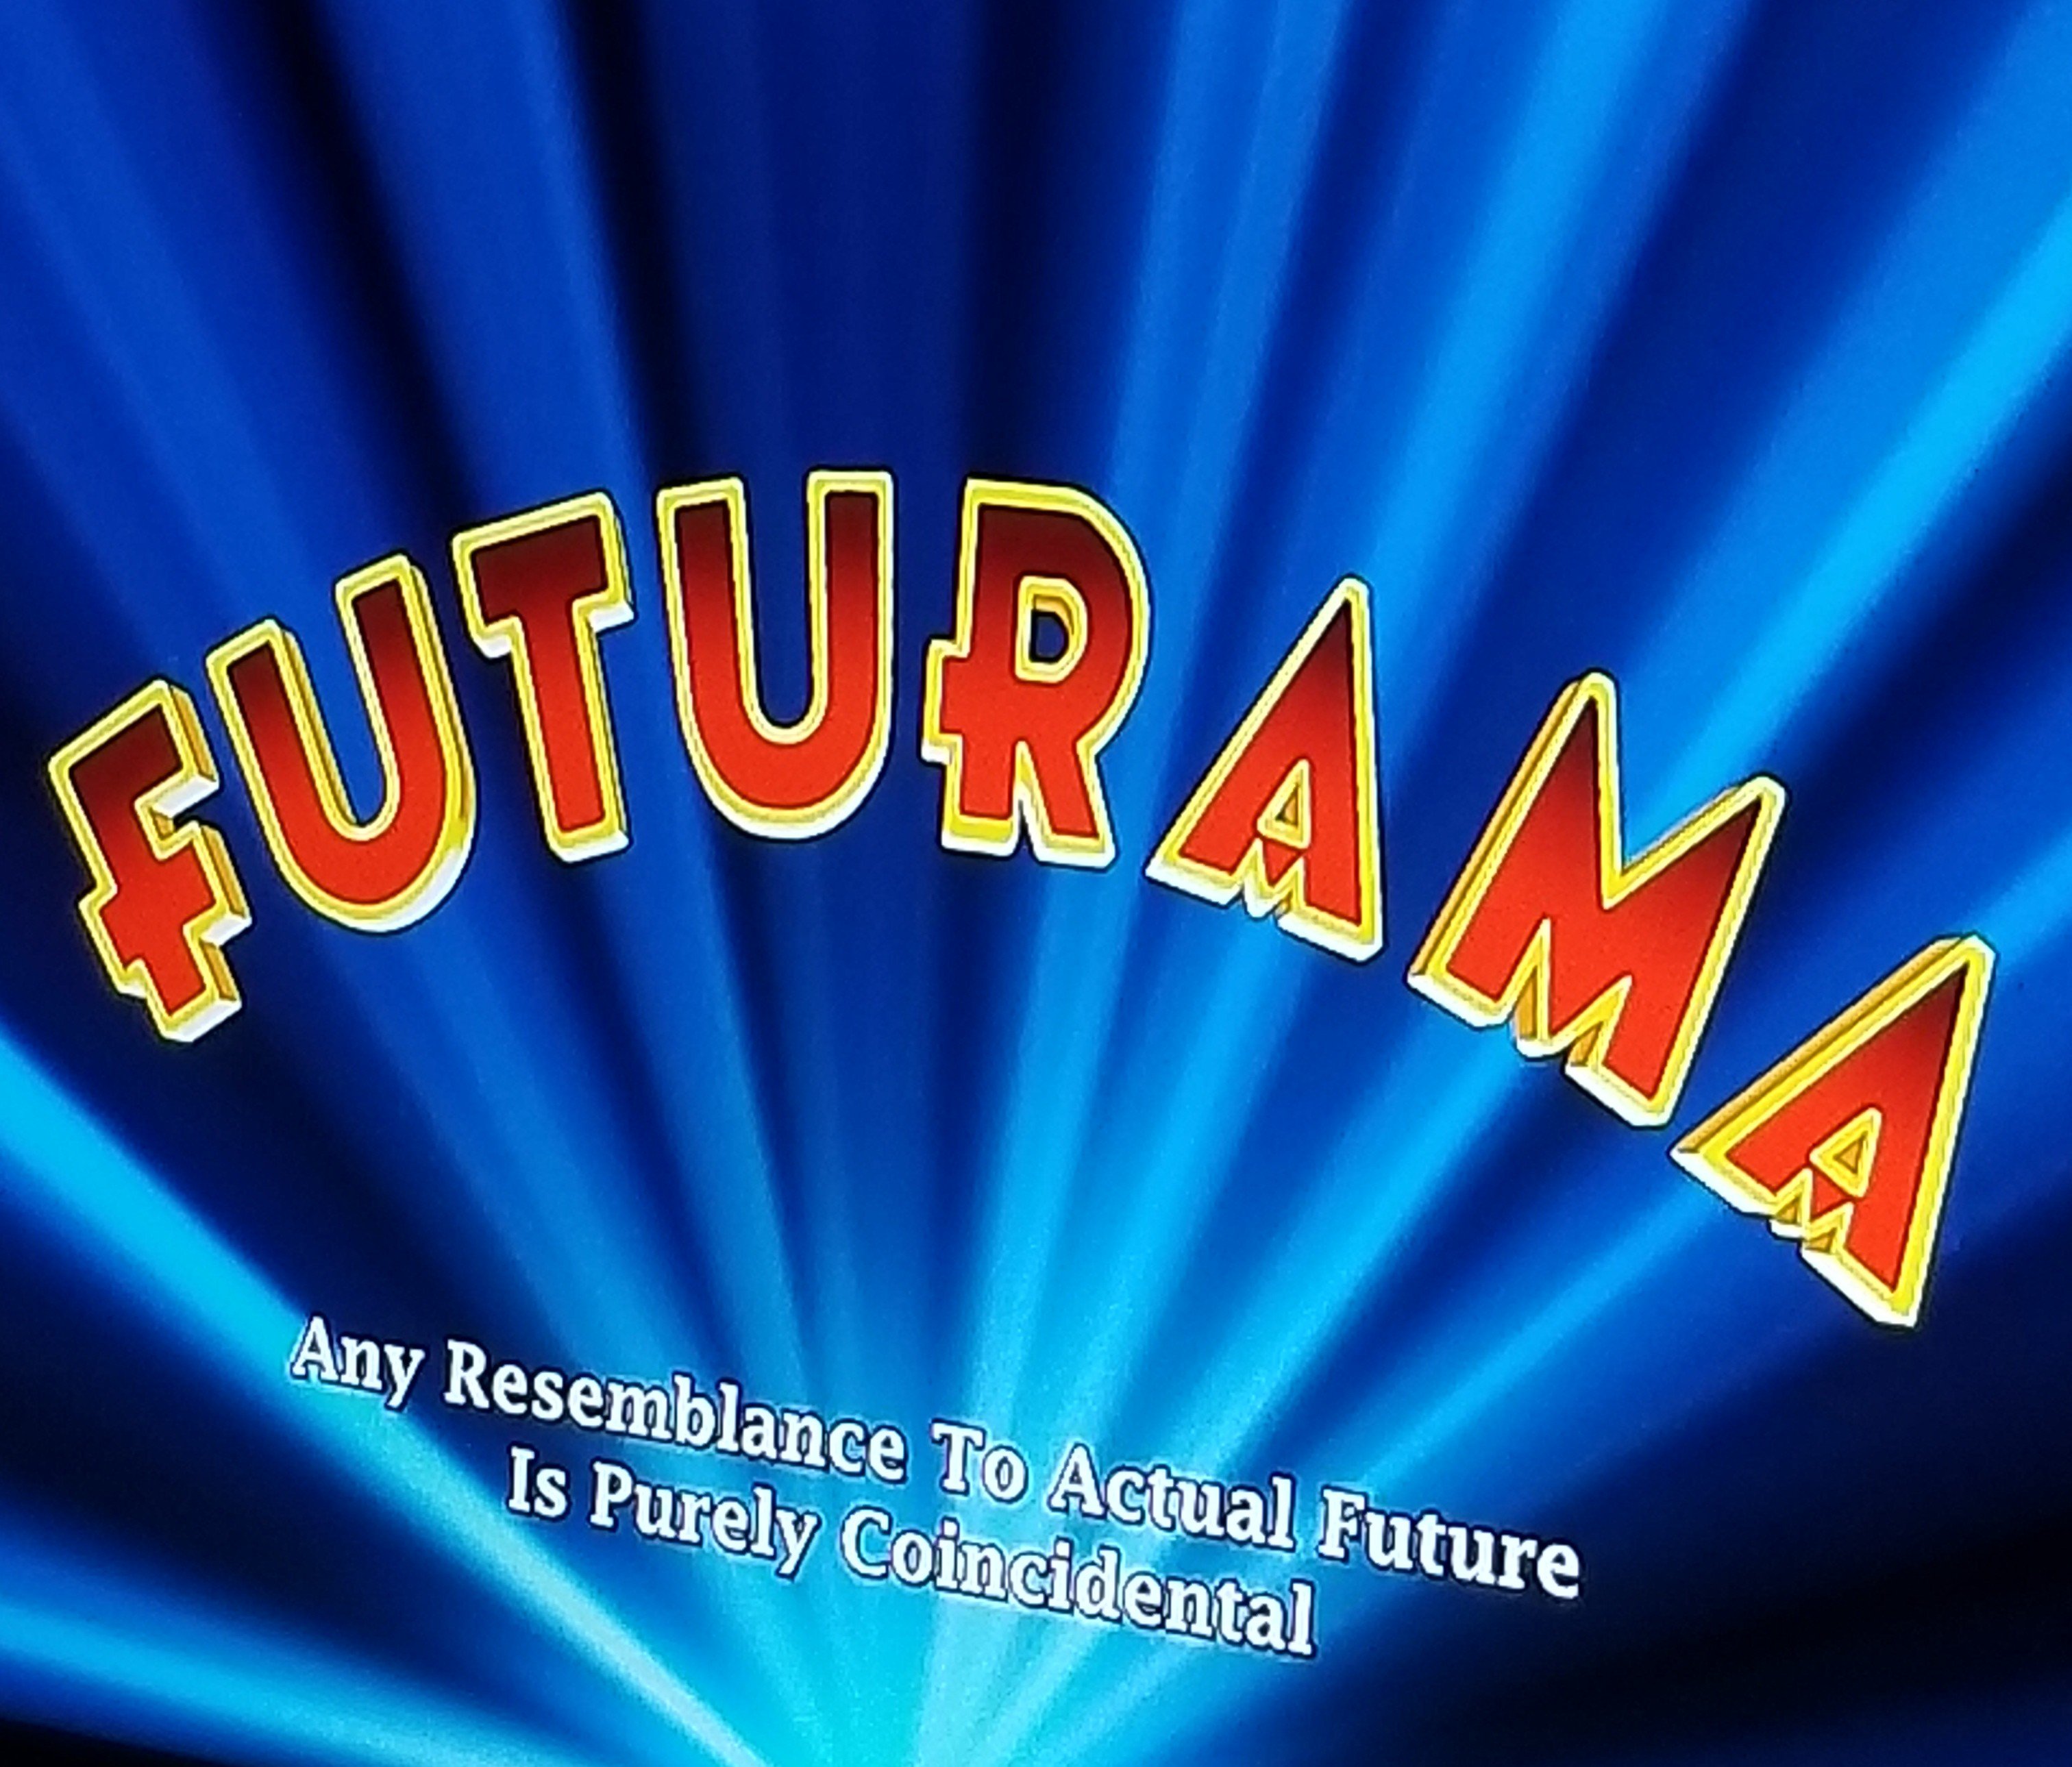 Futurama Splash Screen with: Any Resemblance to Actual Future is Purely Coincidental.